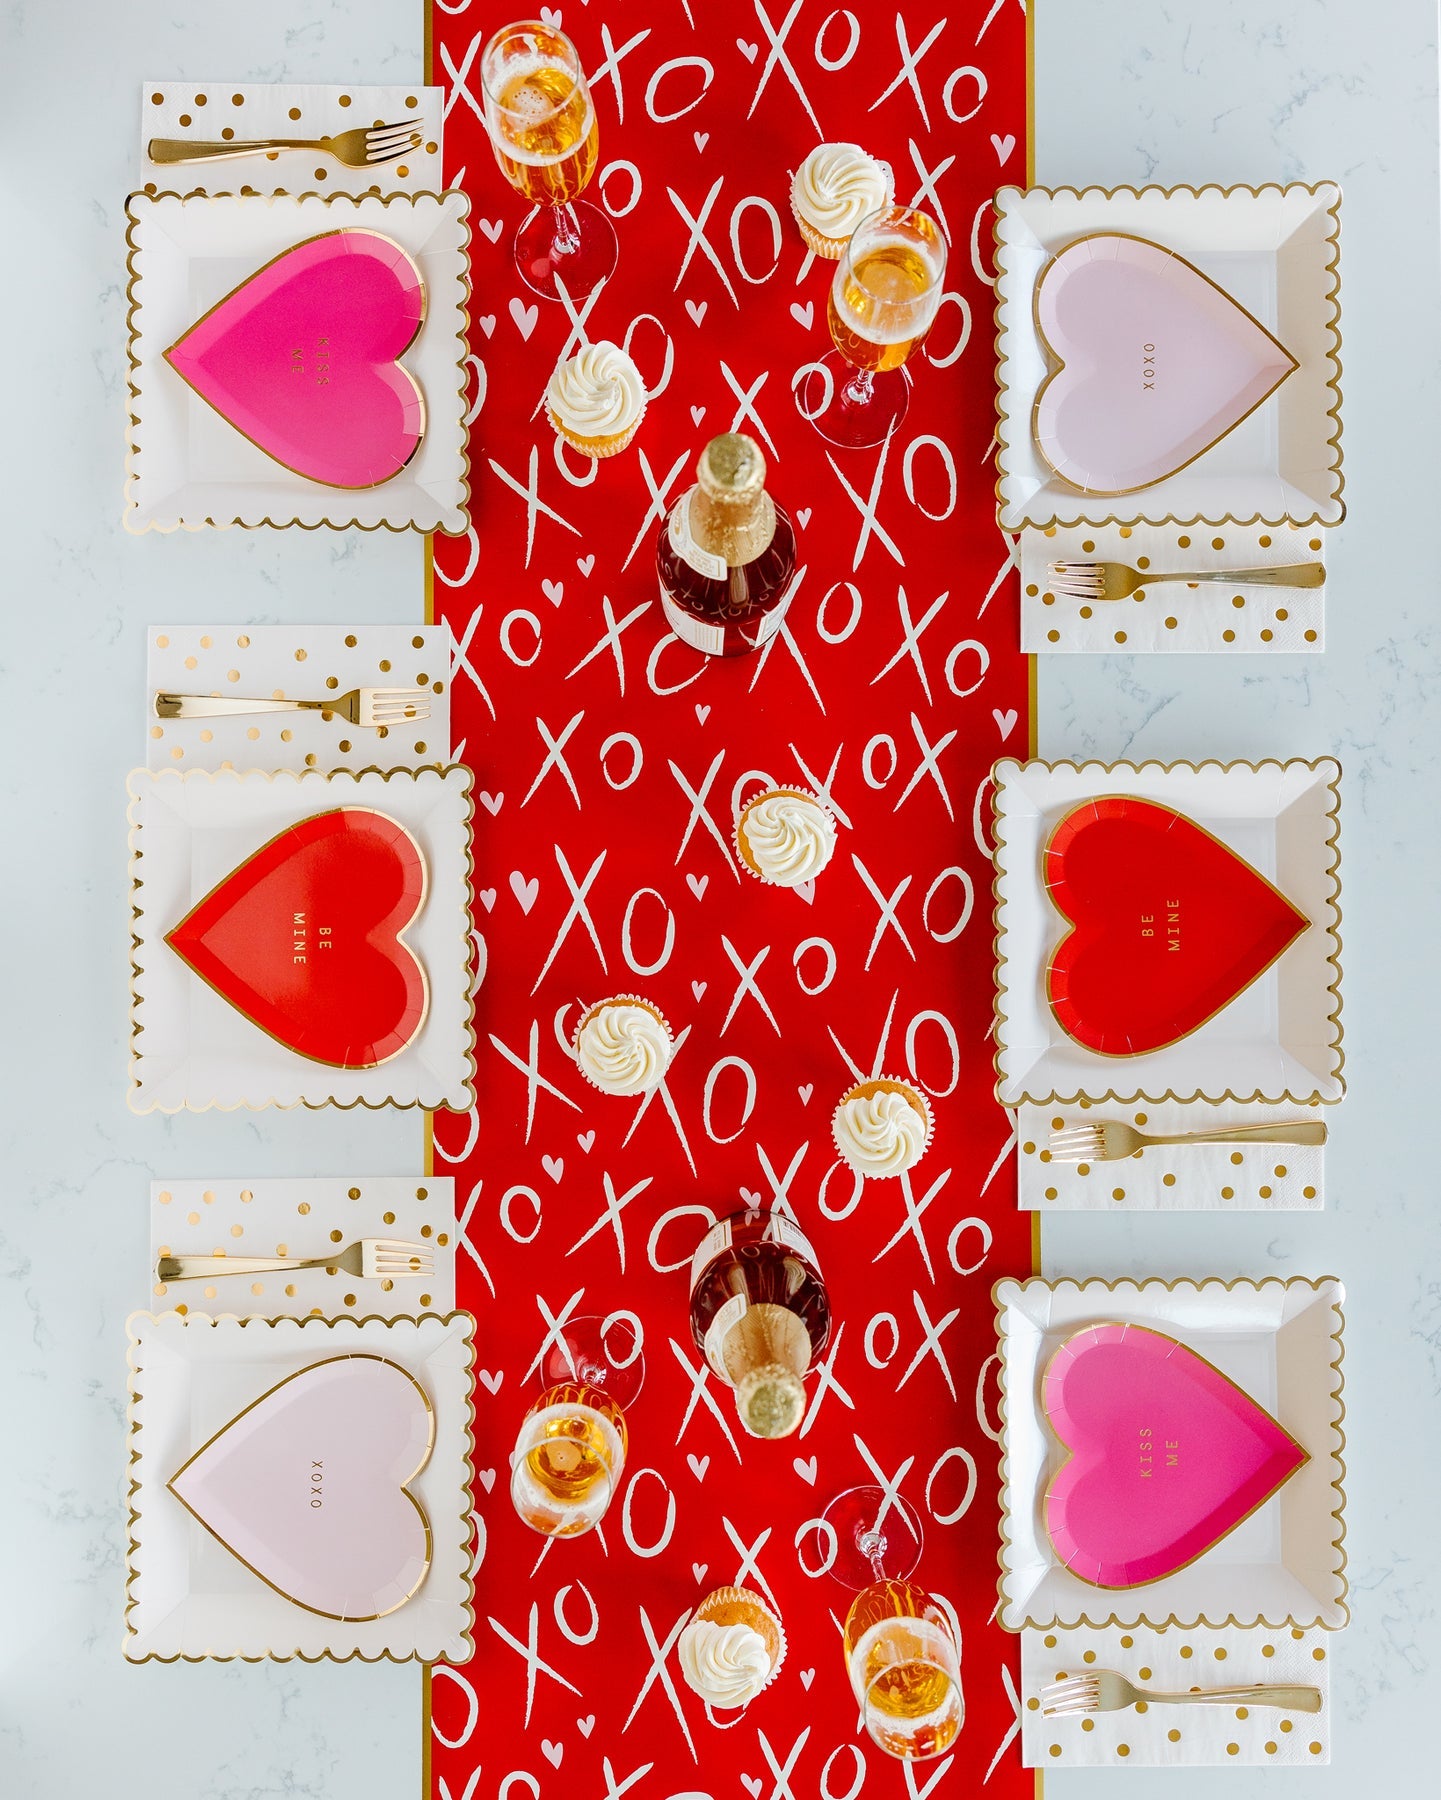 XOXO Paper Table Runner (1 Count)